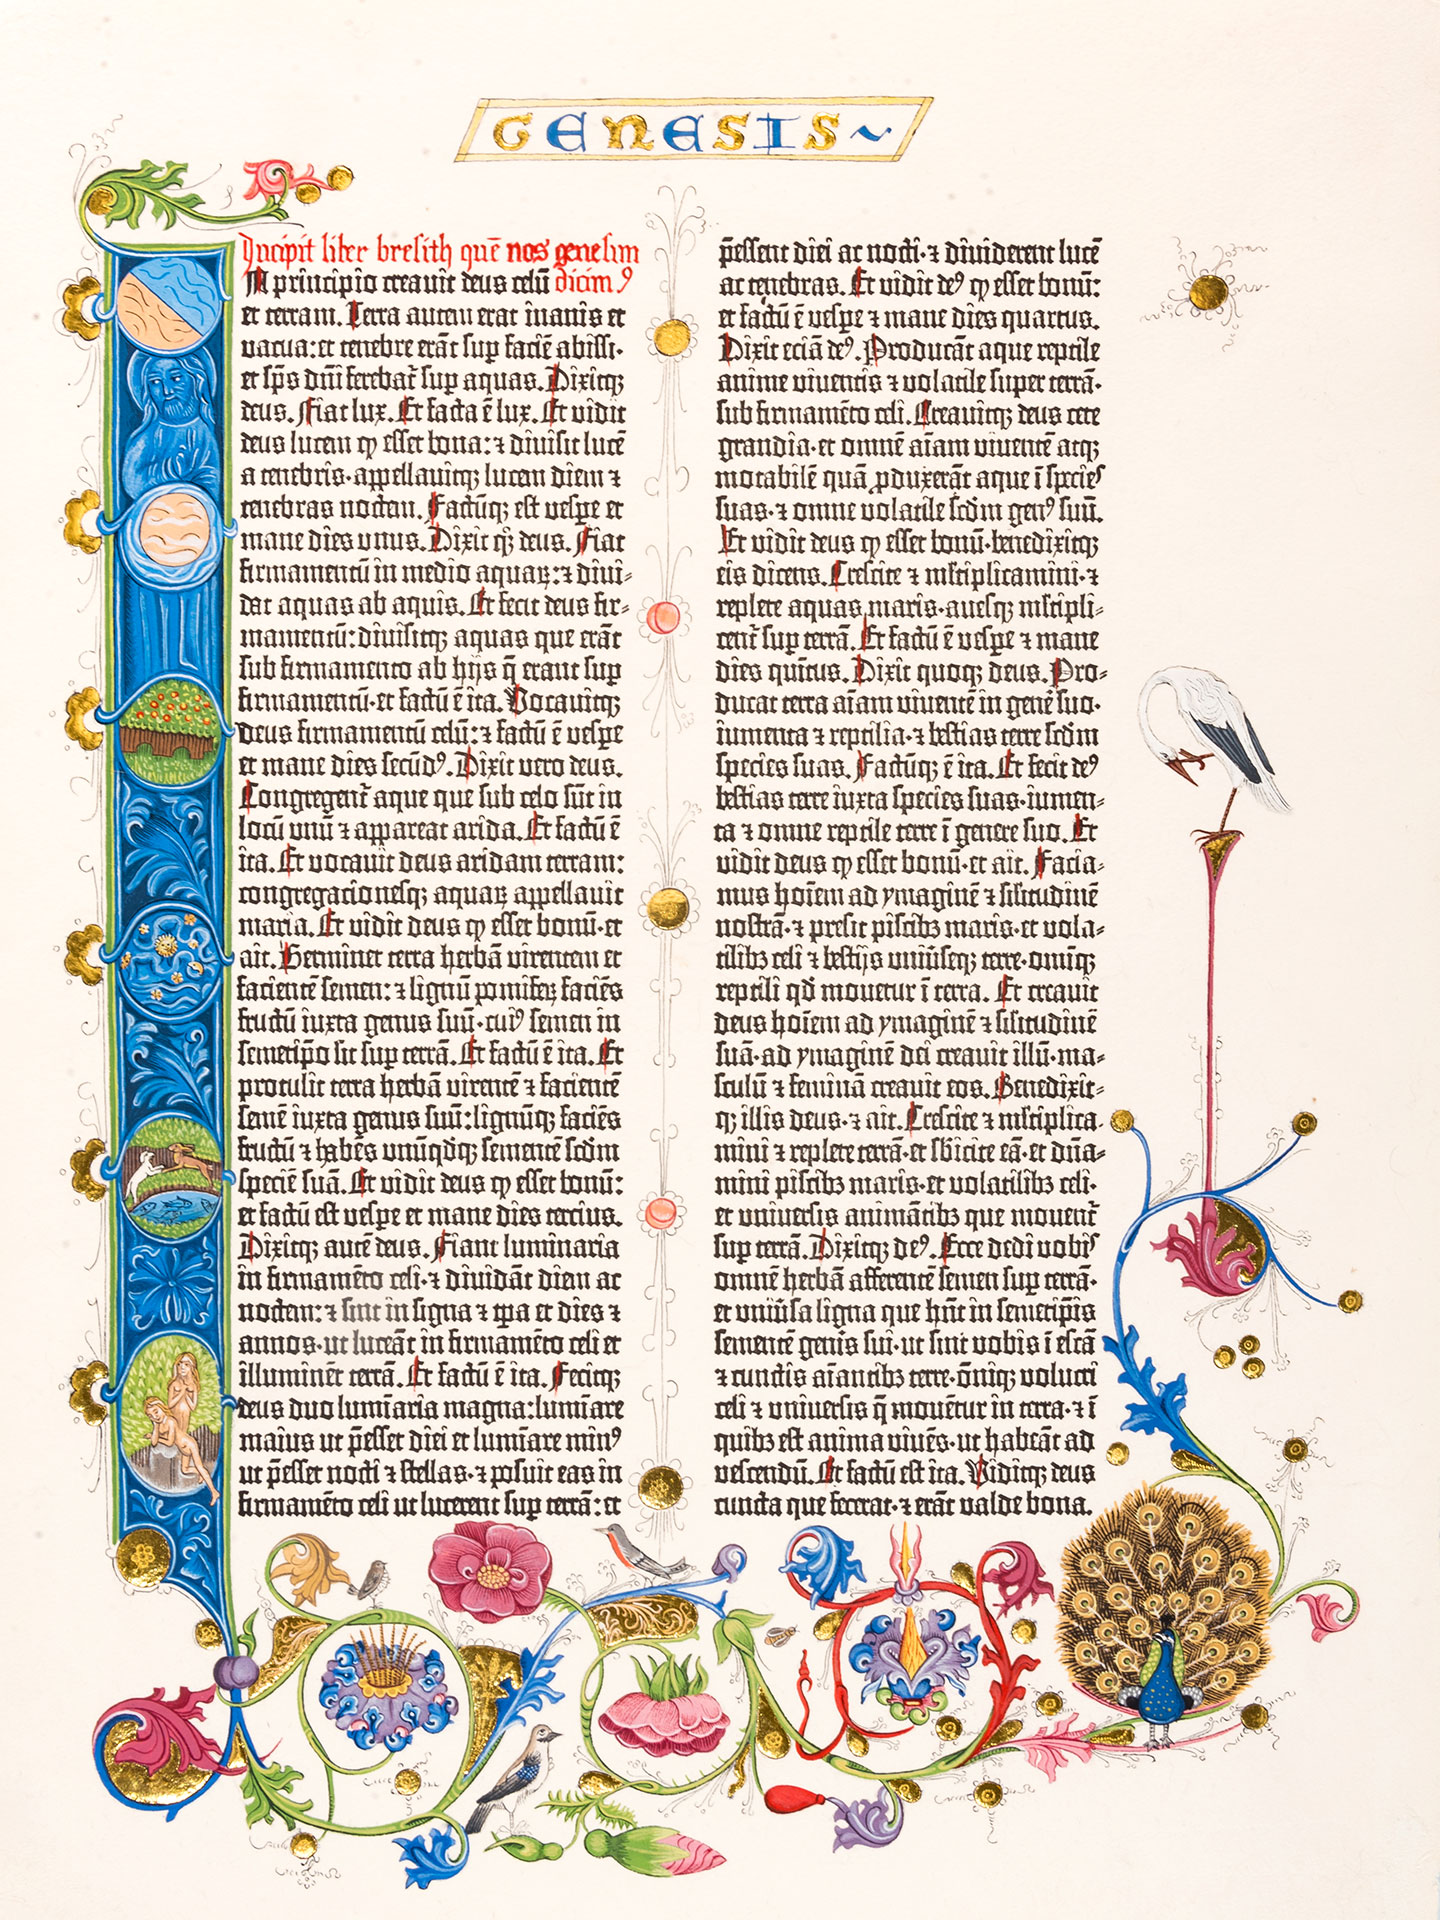 Genesis. Ornamental page from the Berlin copy of the Gutenberg Bible